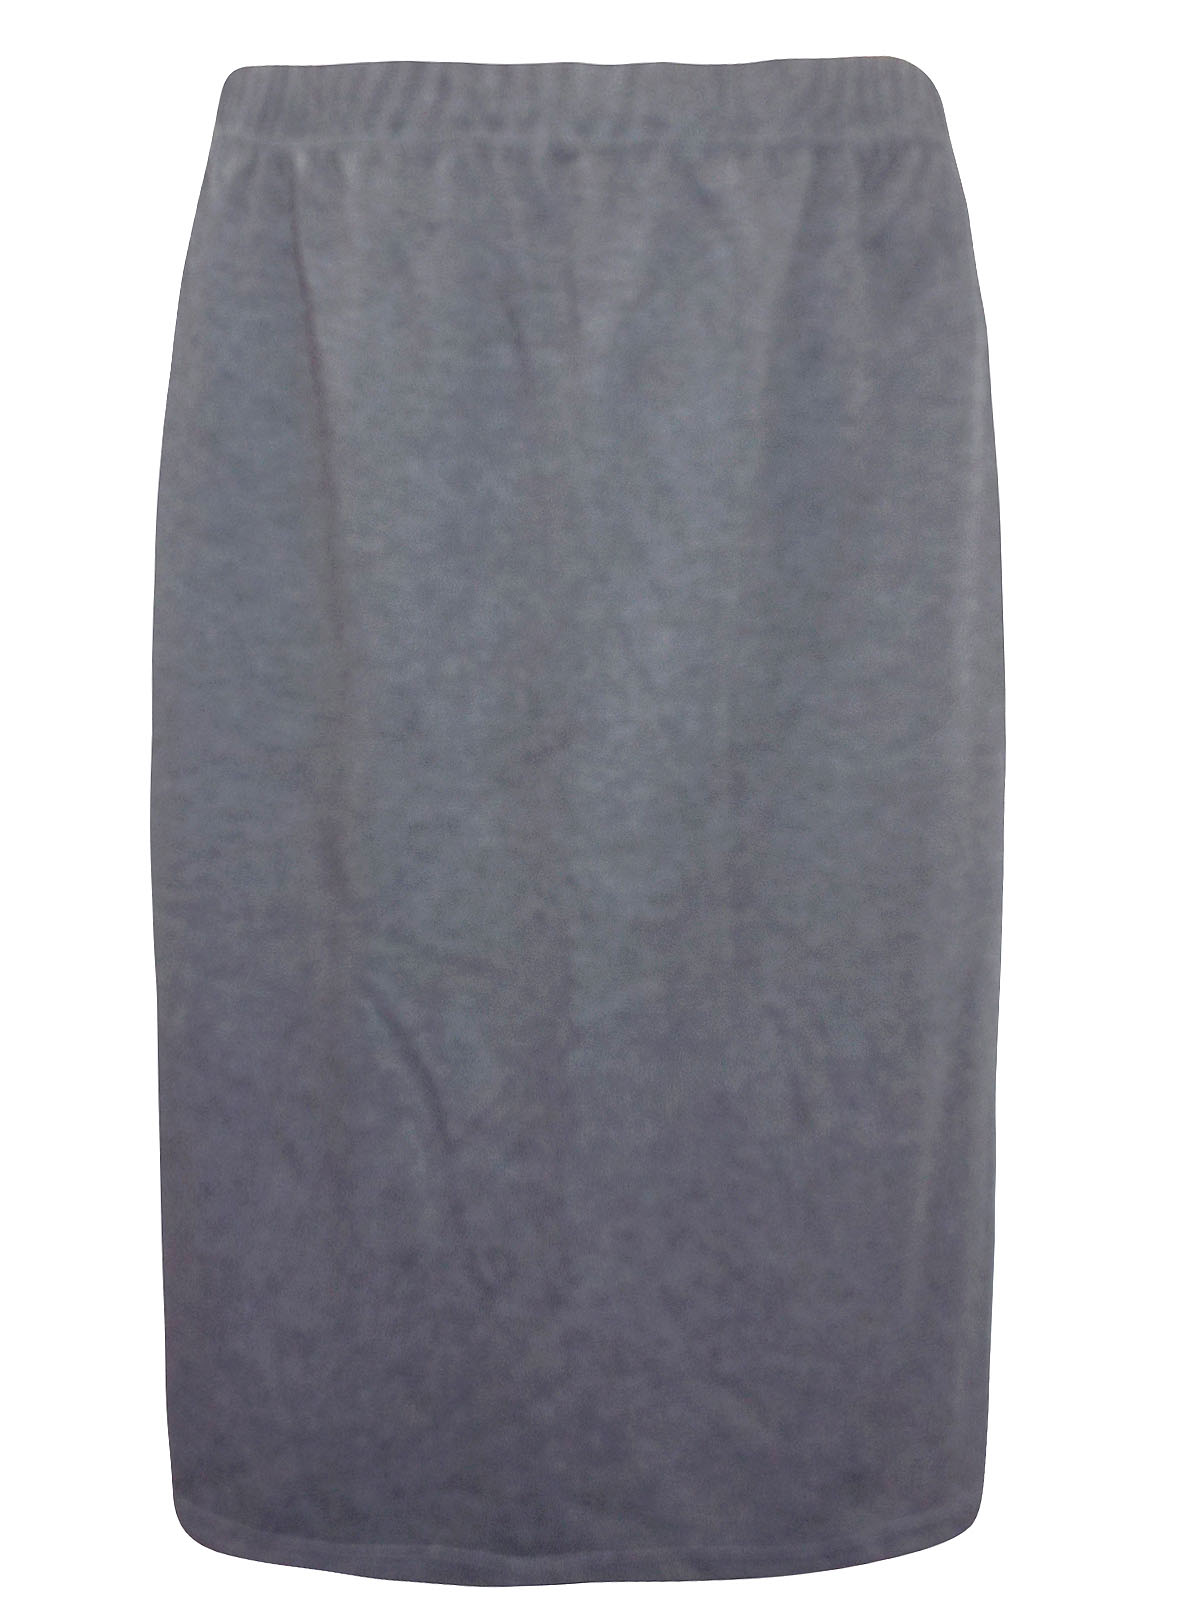 ASSORTED Ladies Skirts - Size 12 to 32/34